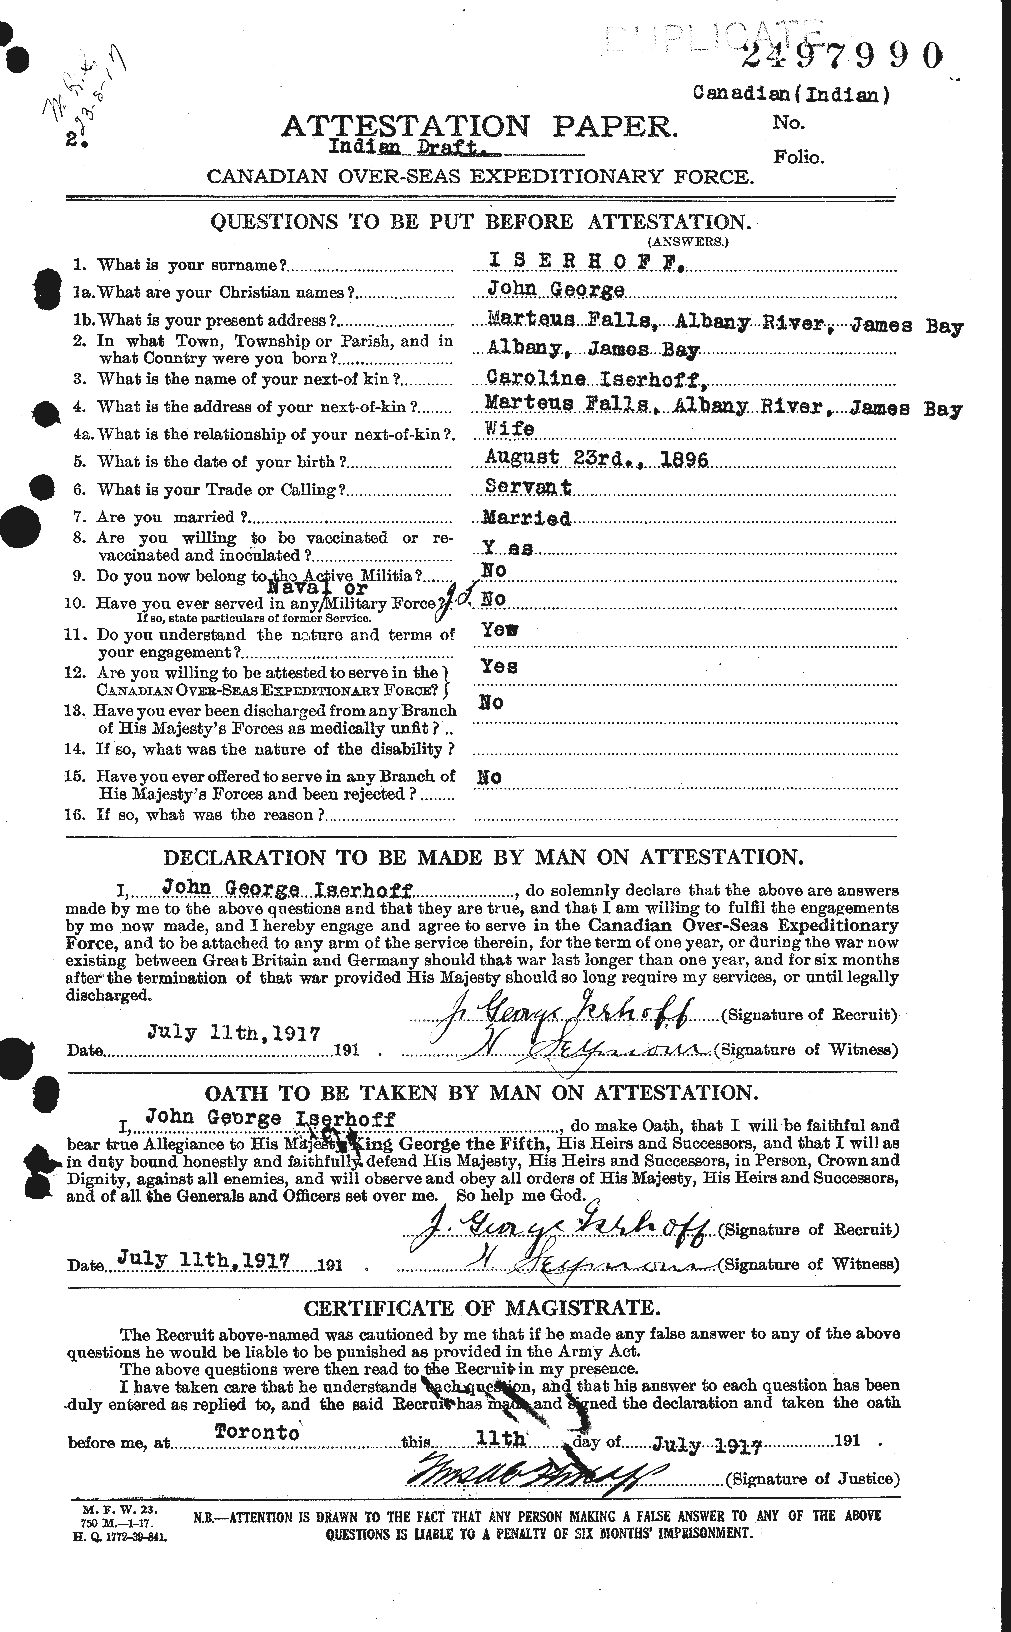 Personnel Records of the First World War - CEF 414008a